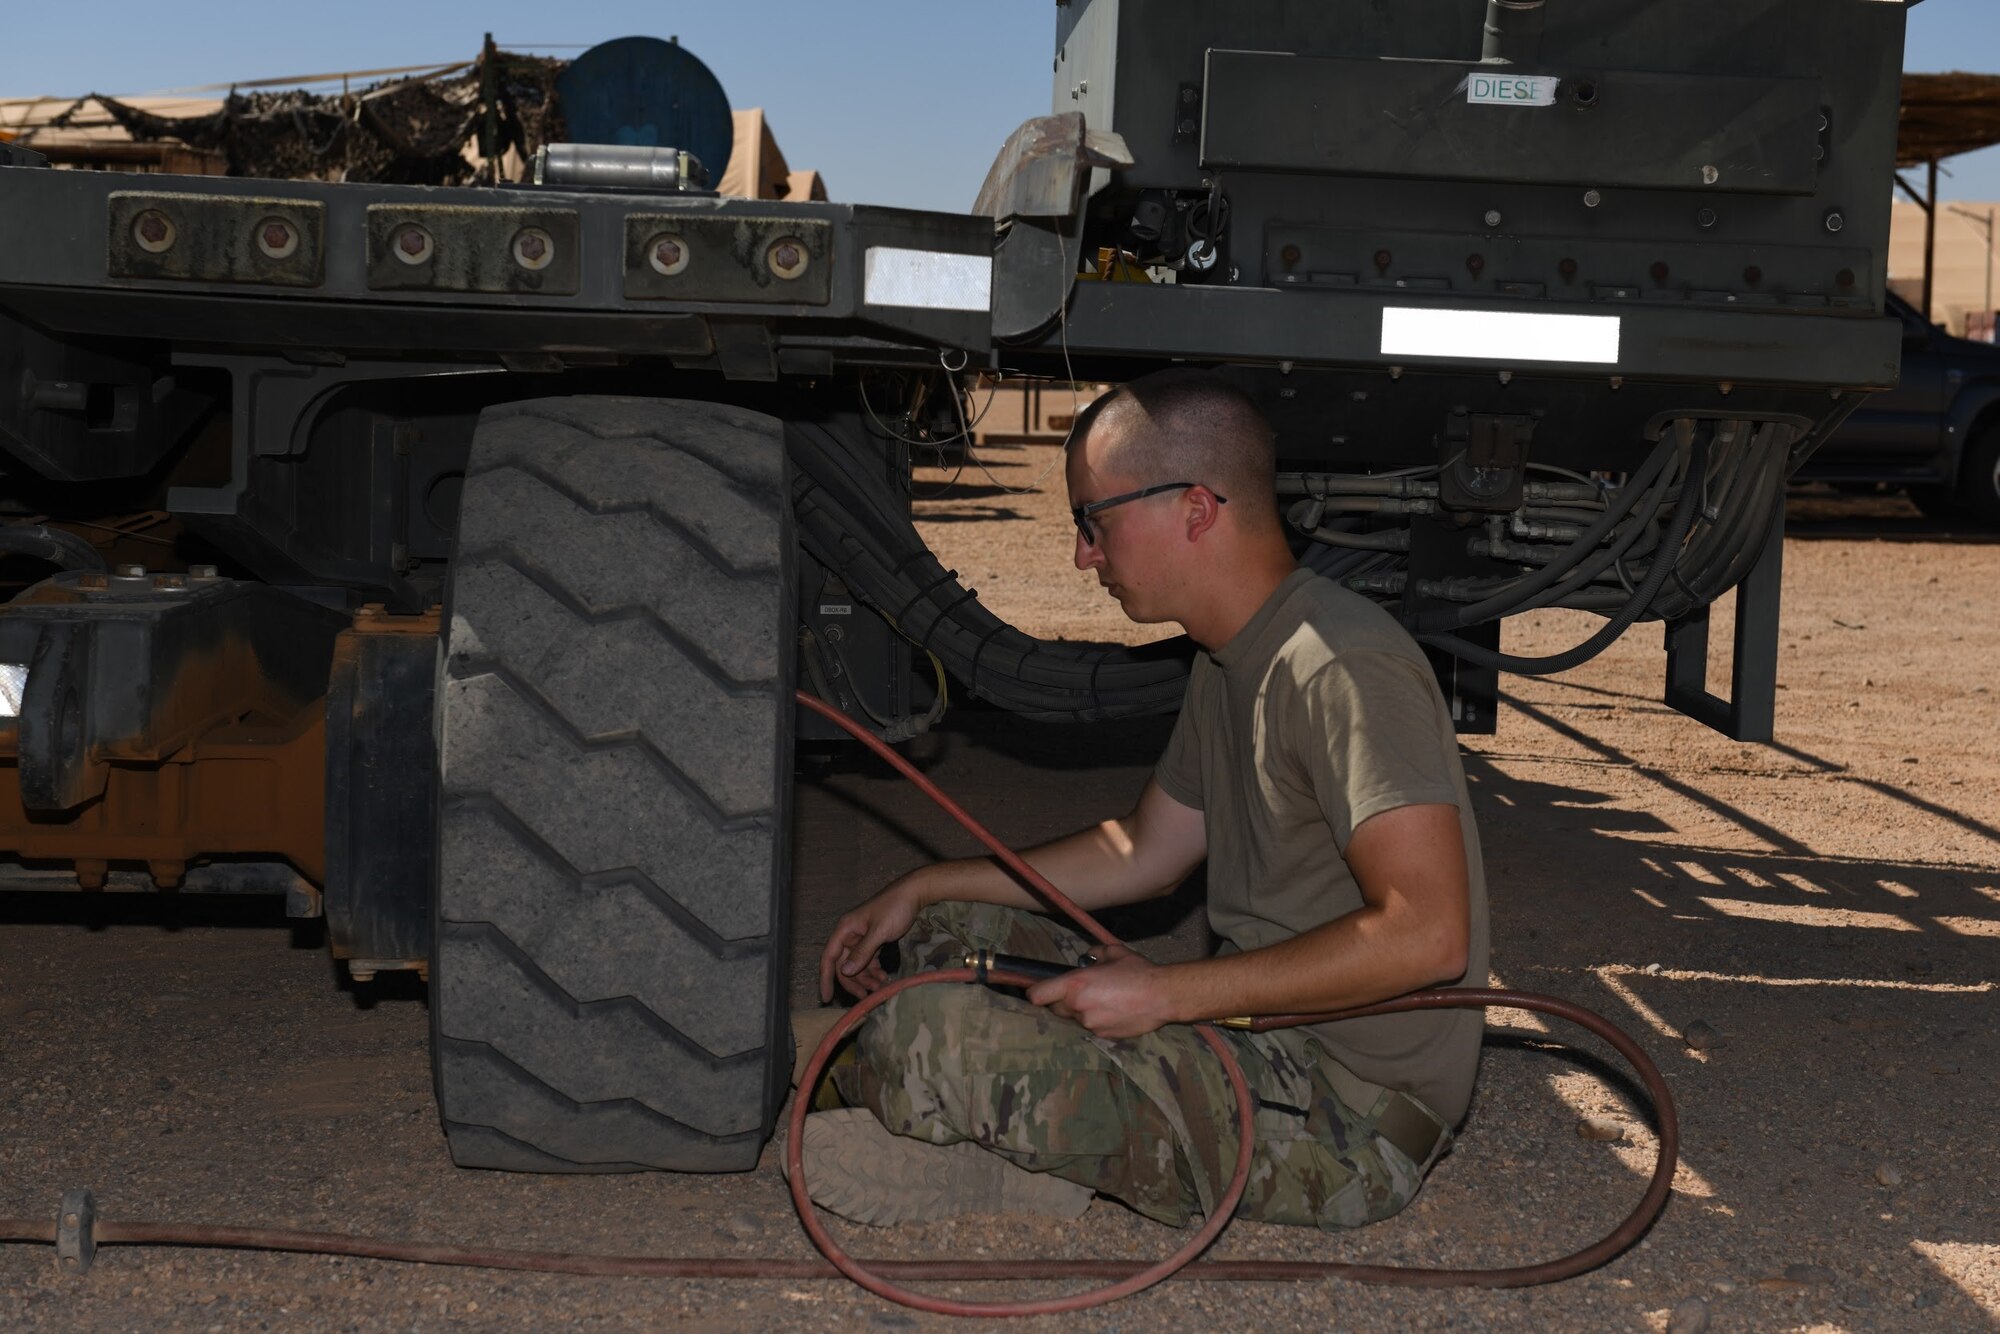 U.S. Air Force Senior Airman Ryan Davis, 724th Expeditionary Air Base Squadron air terminal operations center journeyman, puts air in a Halvorsen 25K-Loader tire, at Nigerien Air Base 201, Agadez, Niger, Jan 4, 2021. These machines are used to upload and download pallets, pallet trains, and rolling stock on cargo aircraft. (U.S. Air Force photo by Senior Airman Gabrielle Winn)